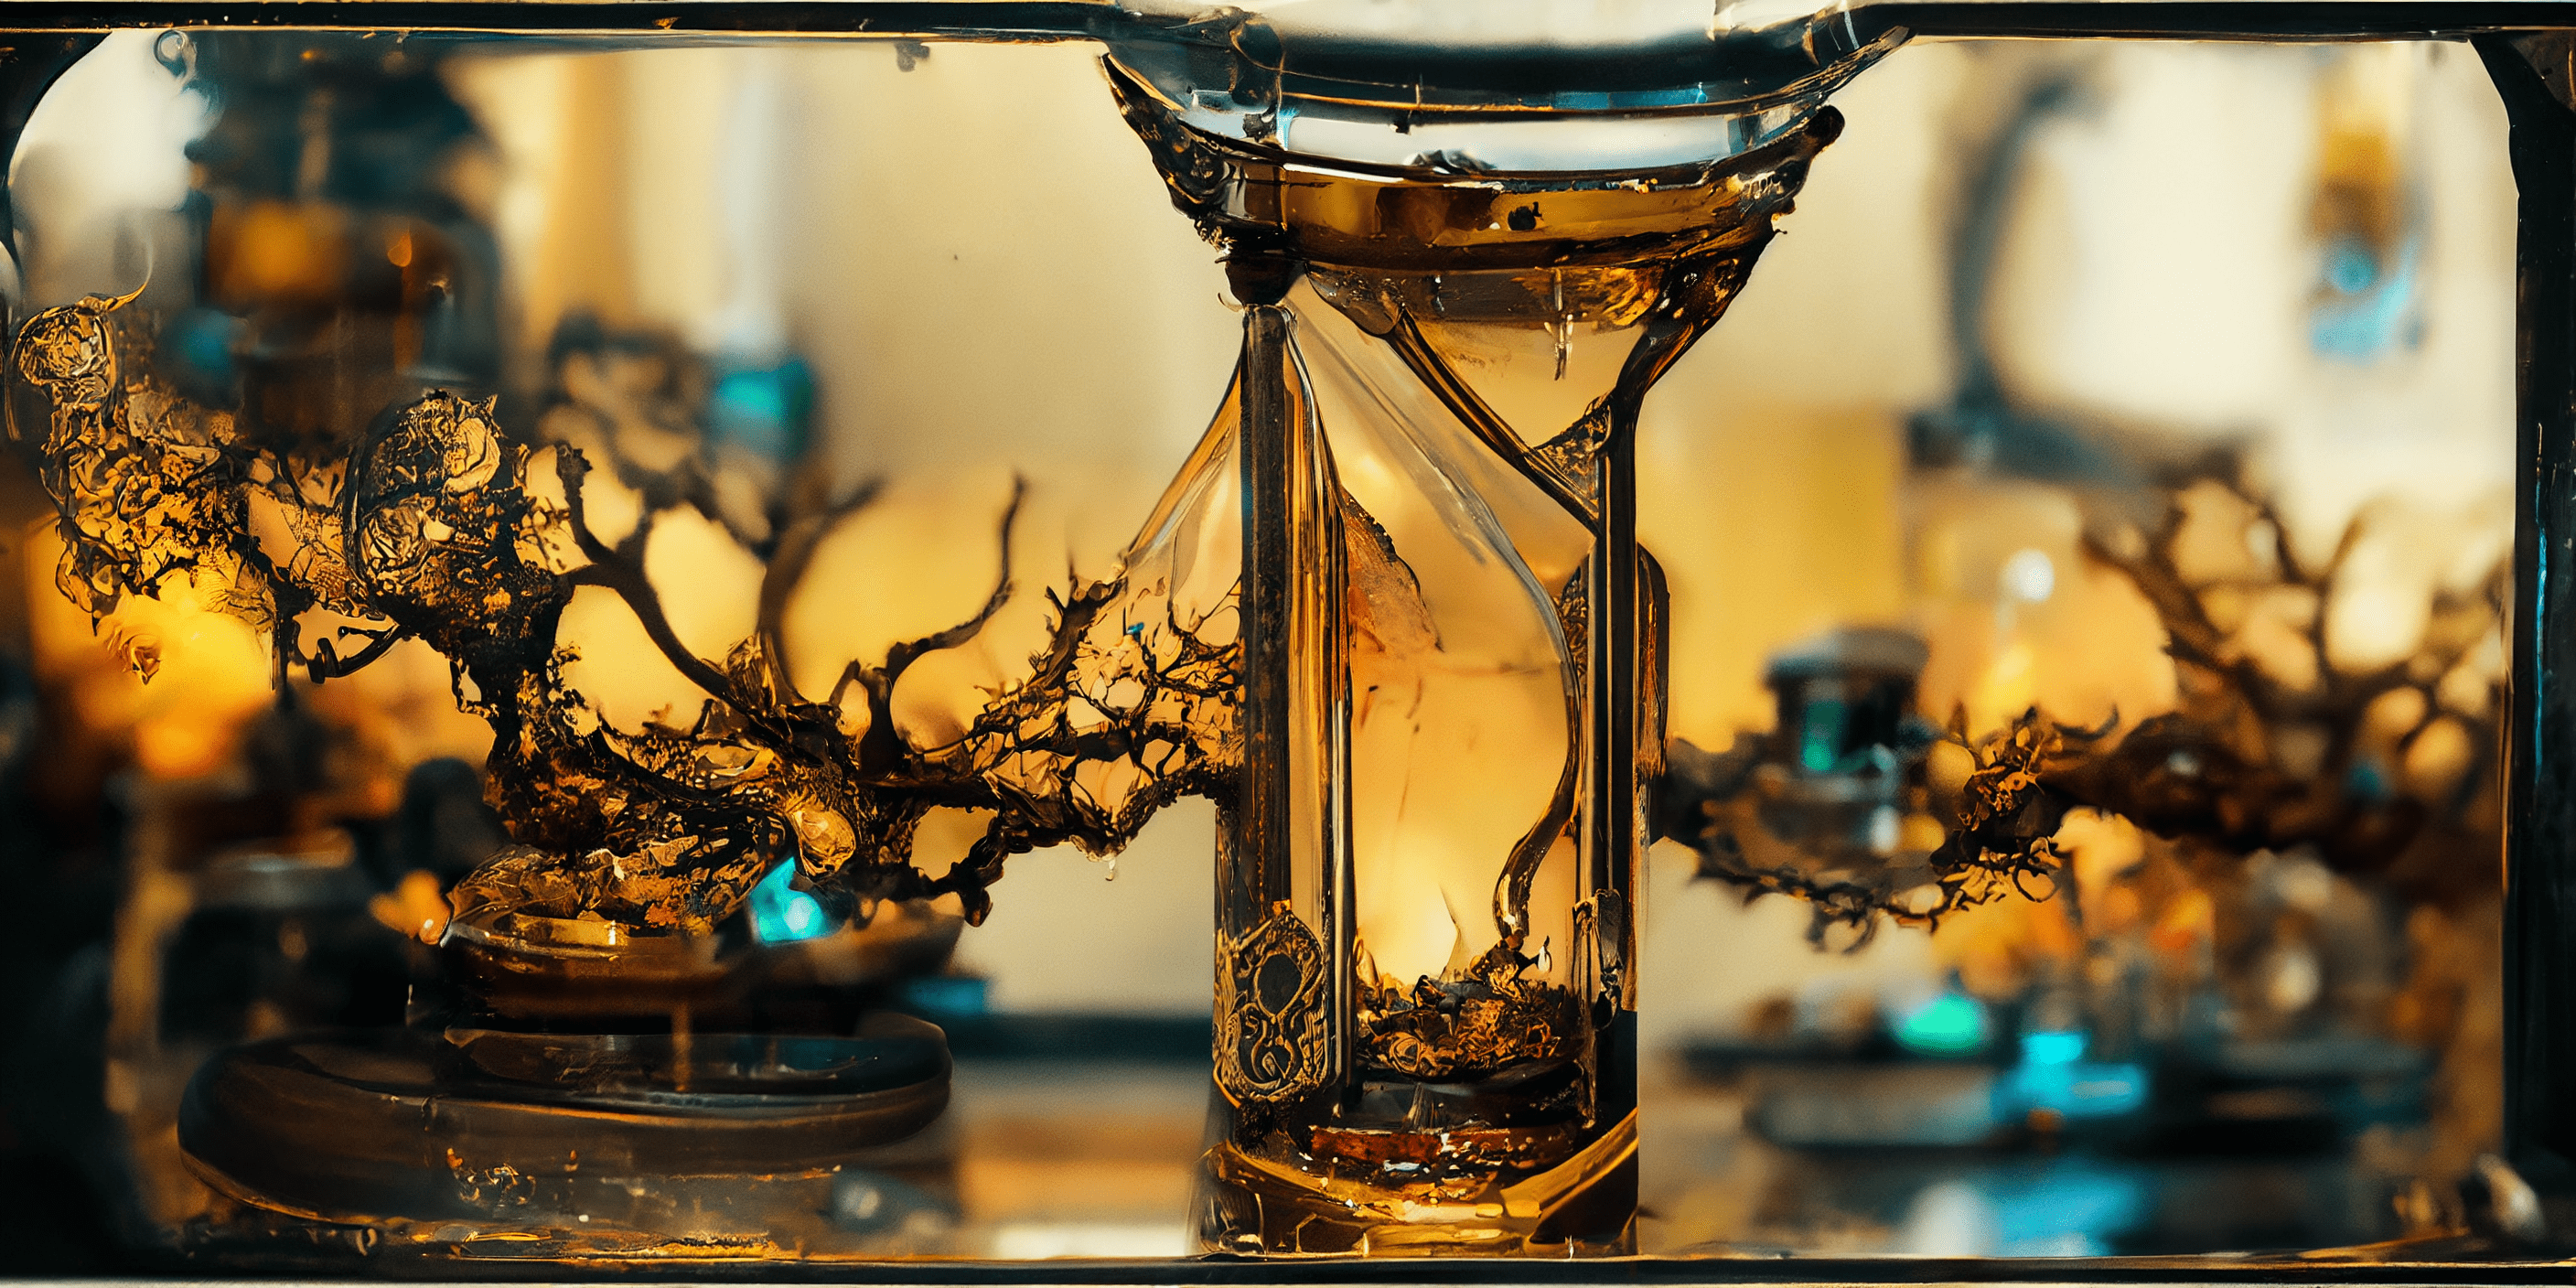 In an hourglass I cannot turn upside down – roots in a glass